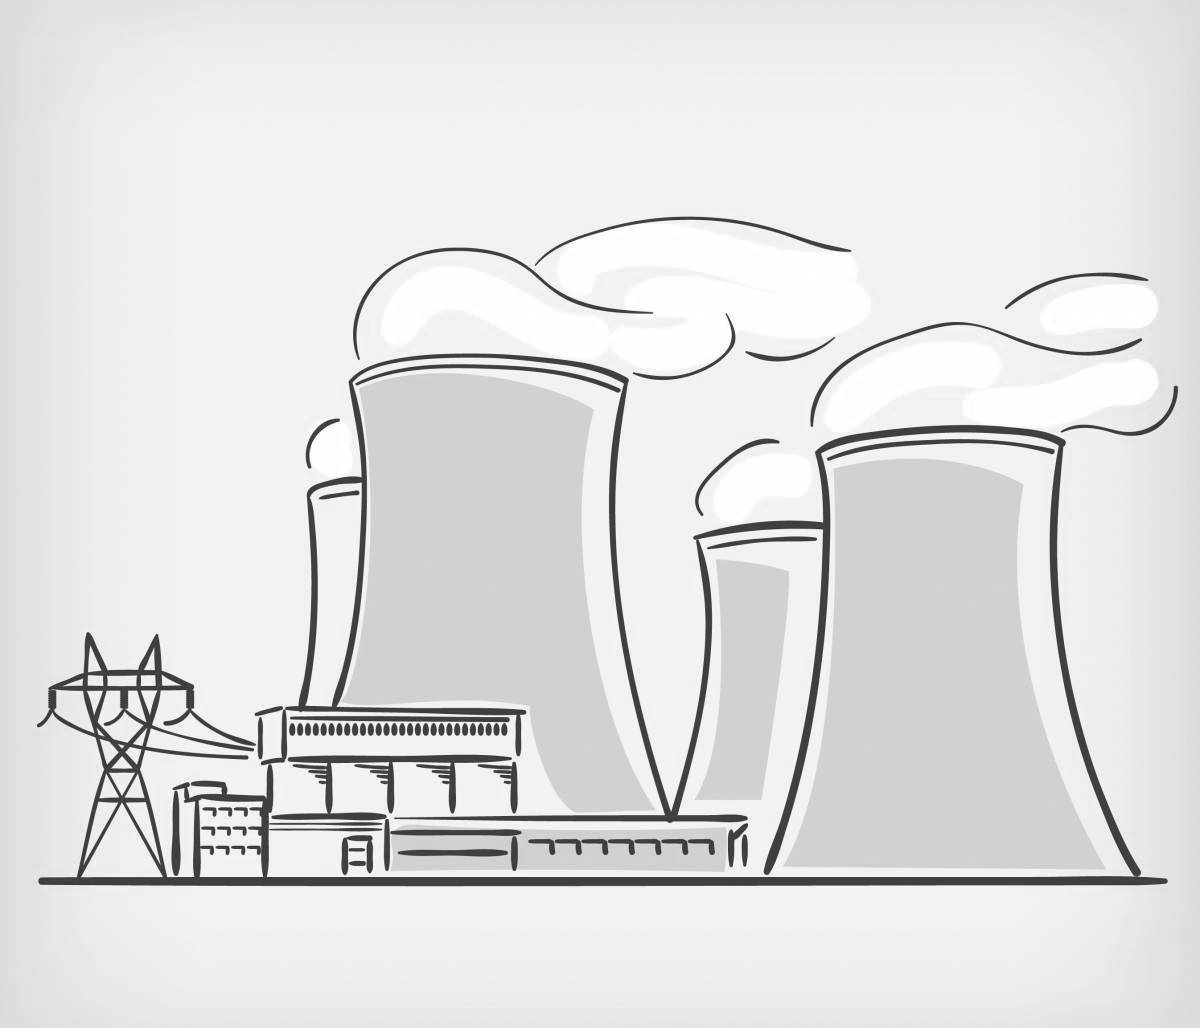 Amazing nuclear power plant